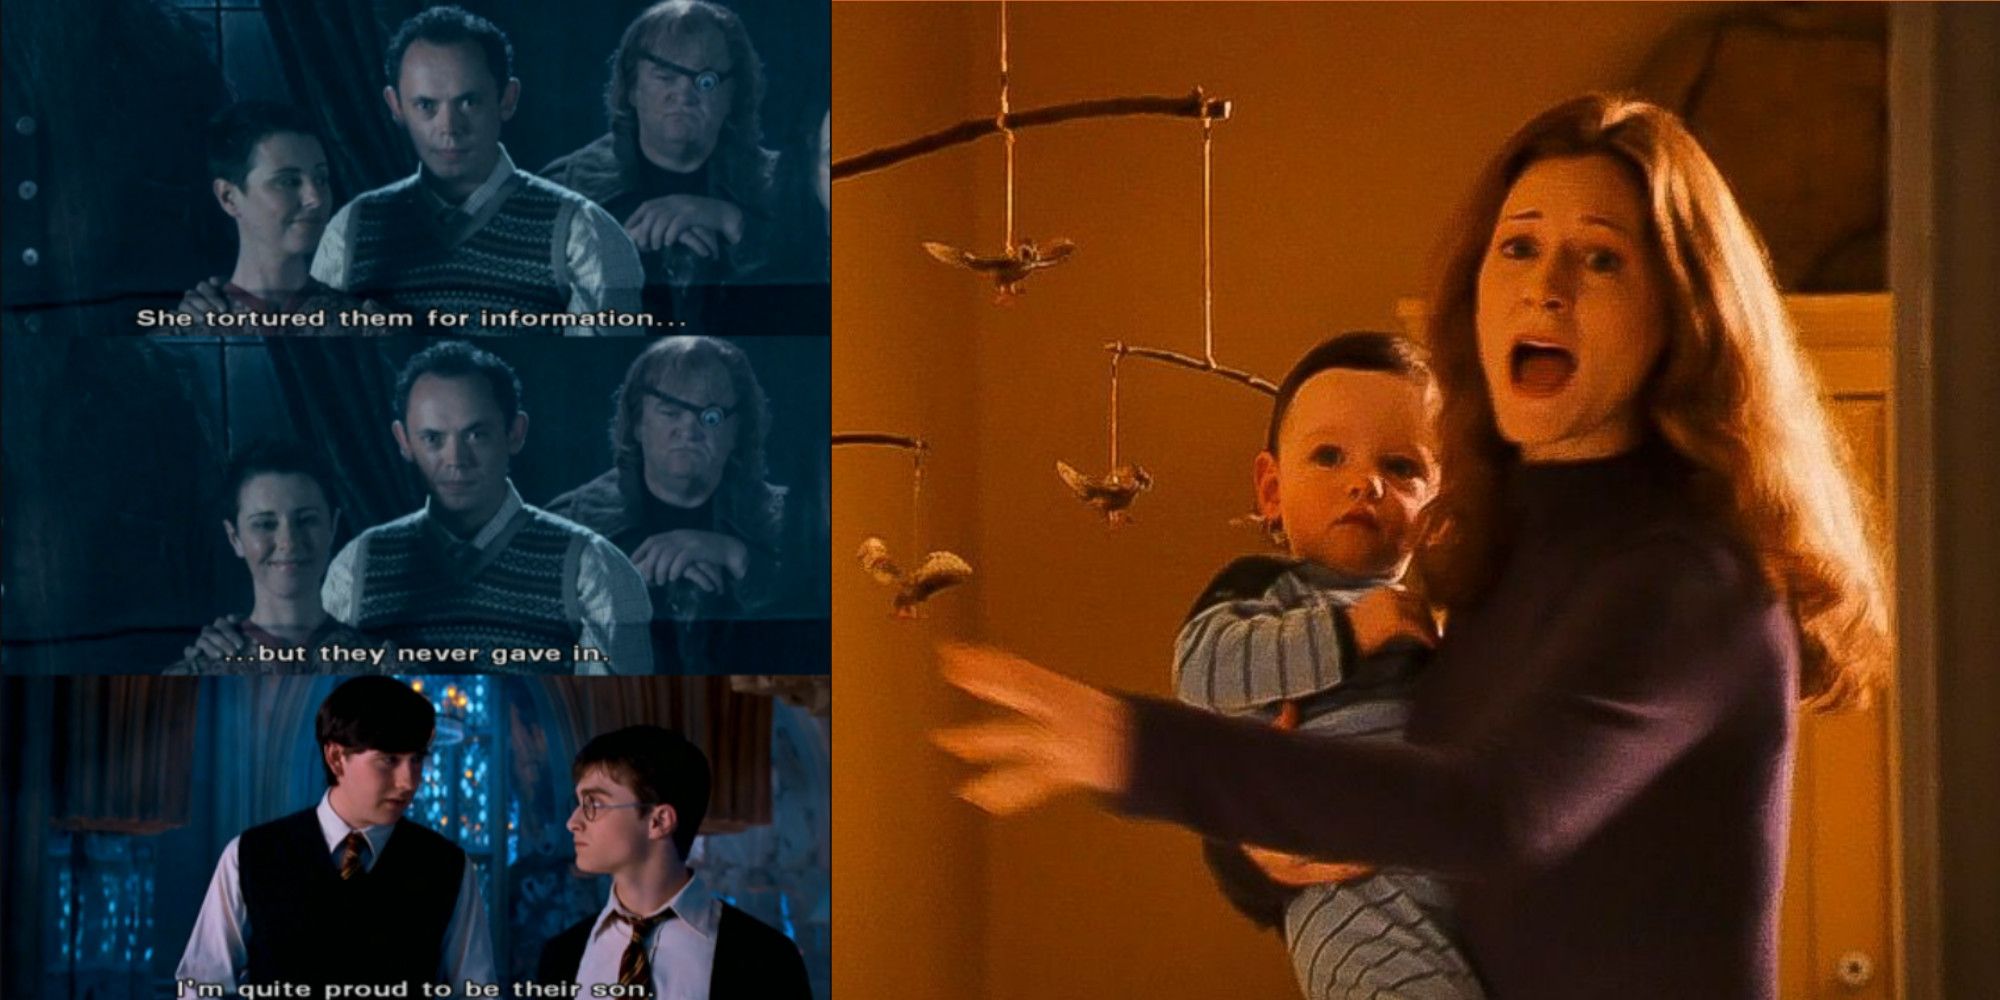 Harry Potter Ways Neville Longbottom Could Be The Perfect Chosen One The Potters vs the Longbottoms